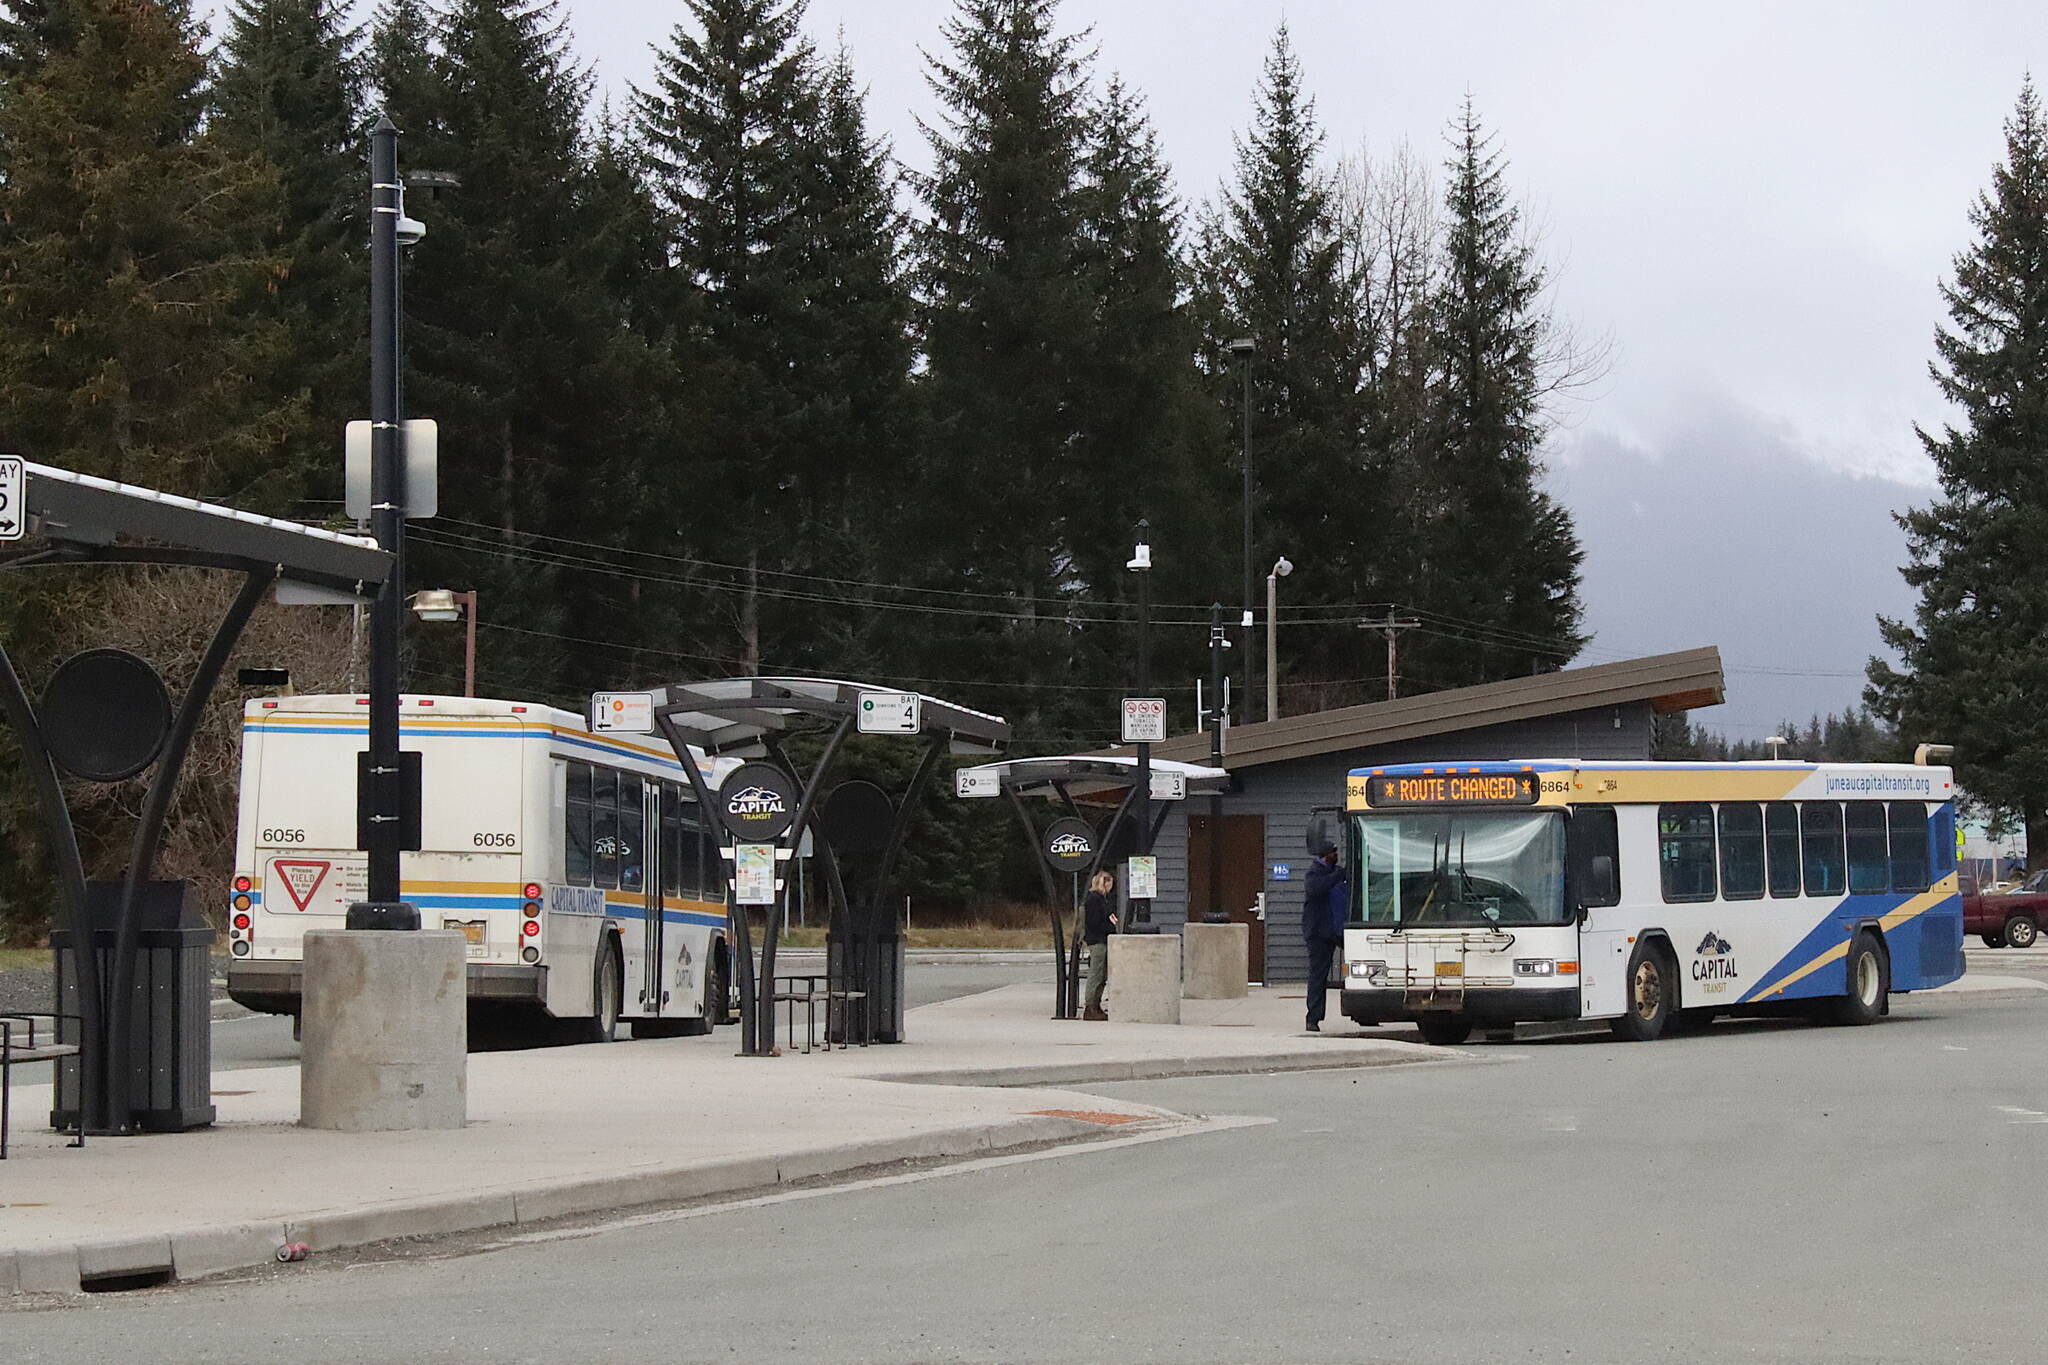 Capital Transit buses stop at the Valley Transit Center on Thursday. Two bus routes serving areas of the Mendenhall Valley and near the airport will temporarily be discontinued starting April 22 due to lack of staff. (Mark Sabbatini / Juneau Empire)